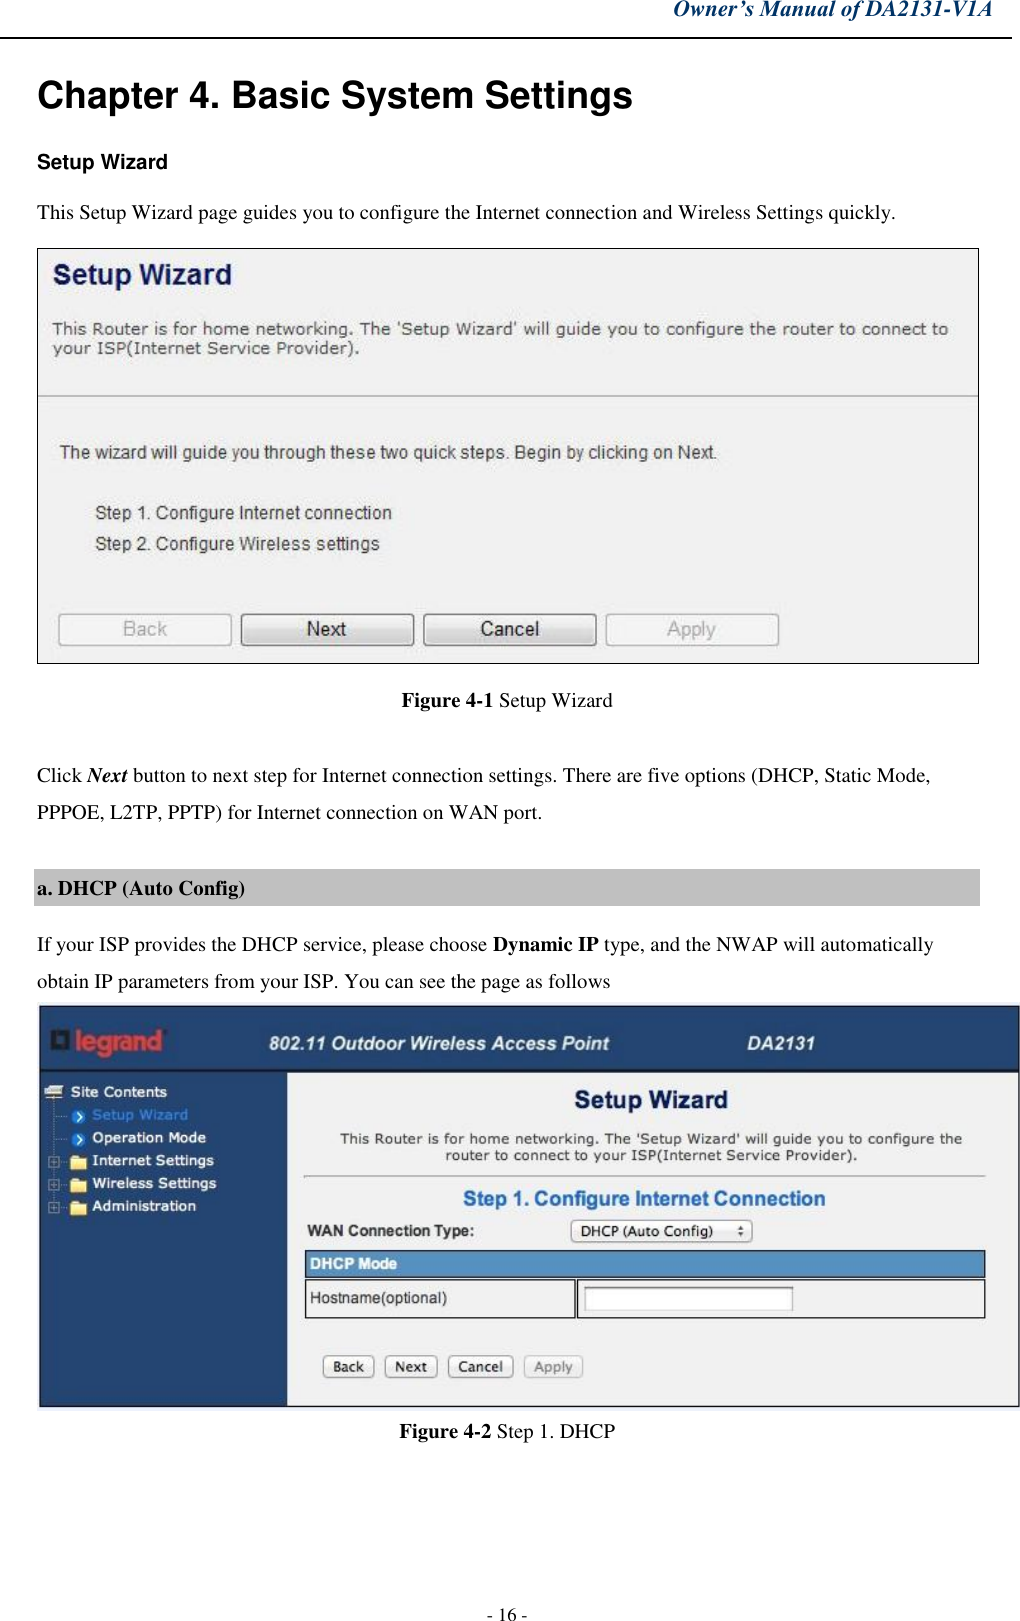 Owner’s Manual of DA2131-V1A - 16 - Chapter 4. Basic System Settings Setup Wizard This Setup Wizard page guides you to configure the Internet connection and Wireless Settings quickly. Figure 4-1 Setup Wizard Click Next button to next step for Internet connection settings. There are five options (DHCP, Static Mode, PPPOE, L2TP, PPTP) for Internet connection on WAN port. a. DHCP (Auto Config)If your ISP provides the DHCP service, please choose Dynamic IP type, and the NWAP will automatically obtain IP parameters from your ISP. You can see the page as follows Figure 4-2 Step 1. DHCP 